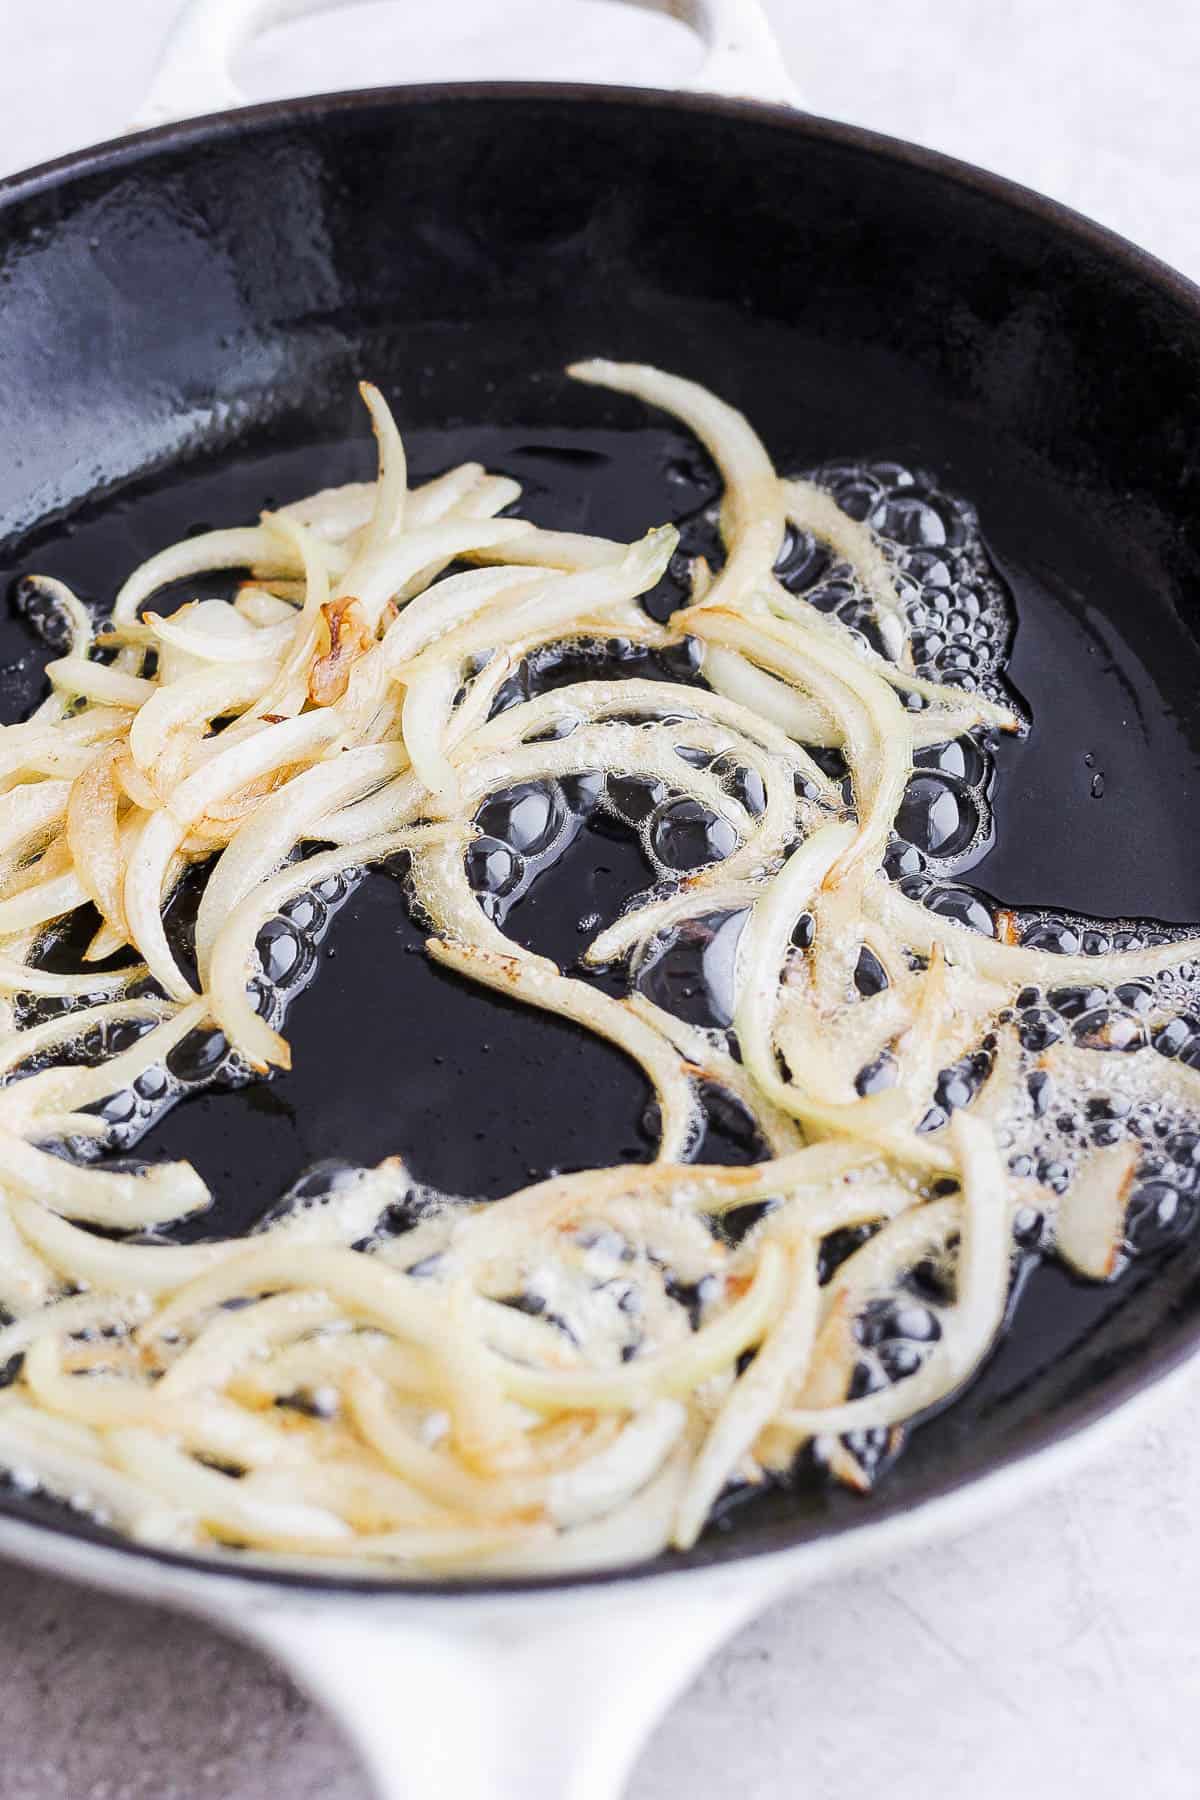 Onion and garlic sautéing in a skillet.